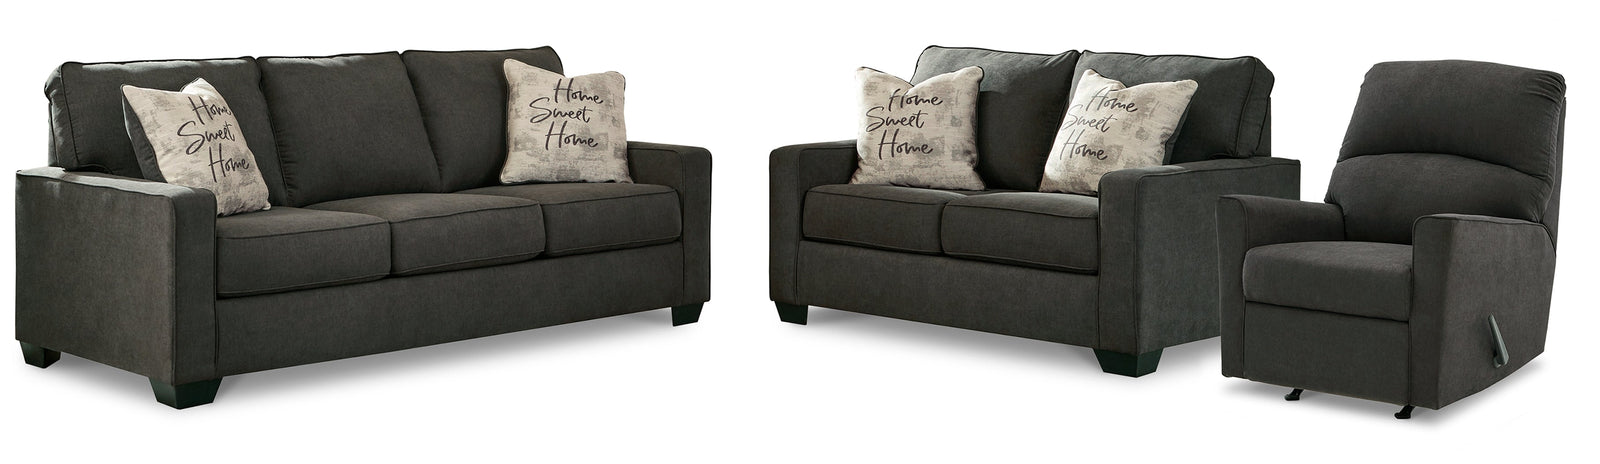 Lucina Charcoal Sofa, Loveseat And Recliner